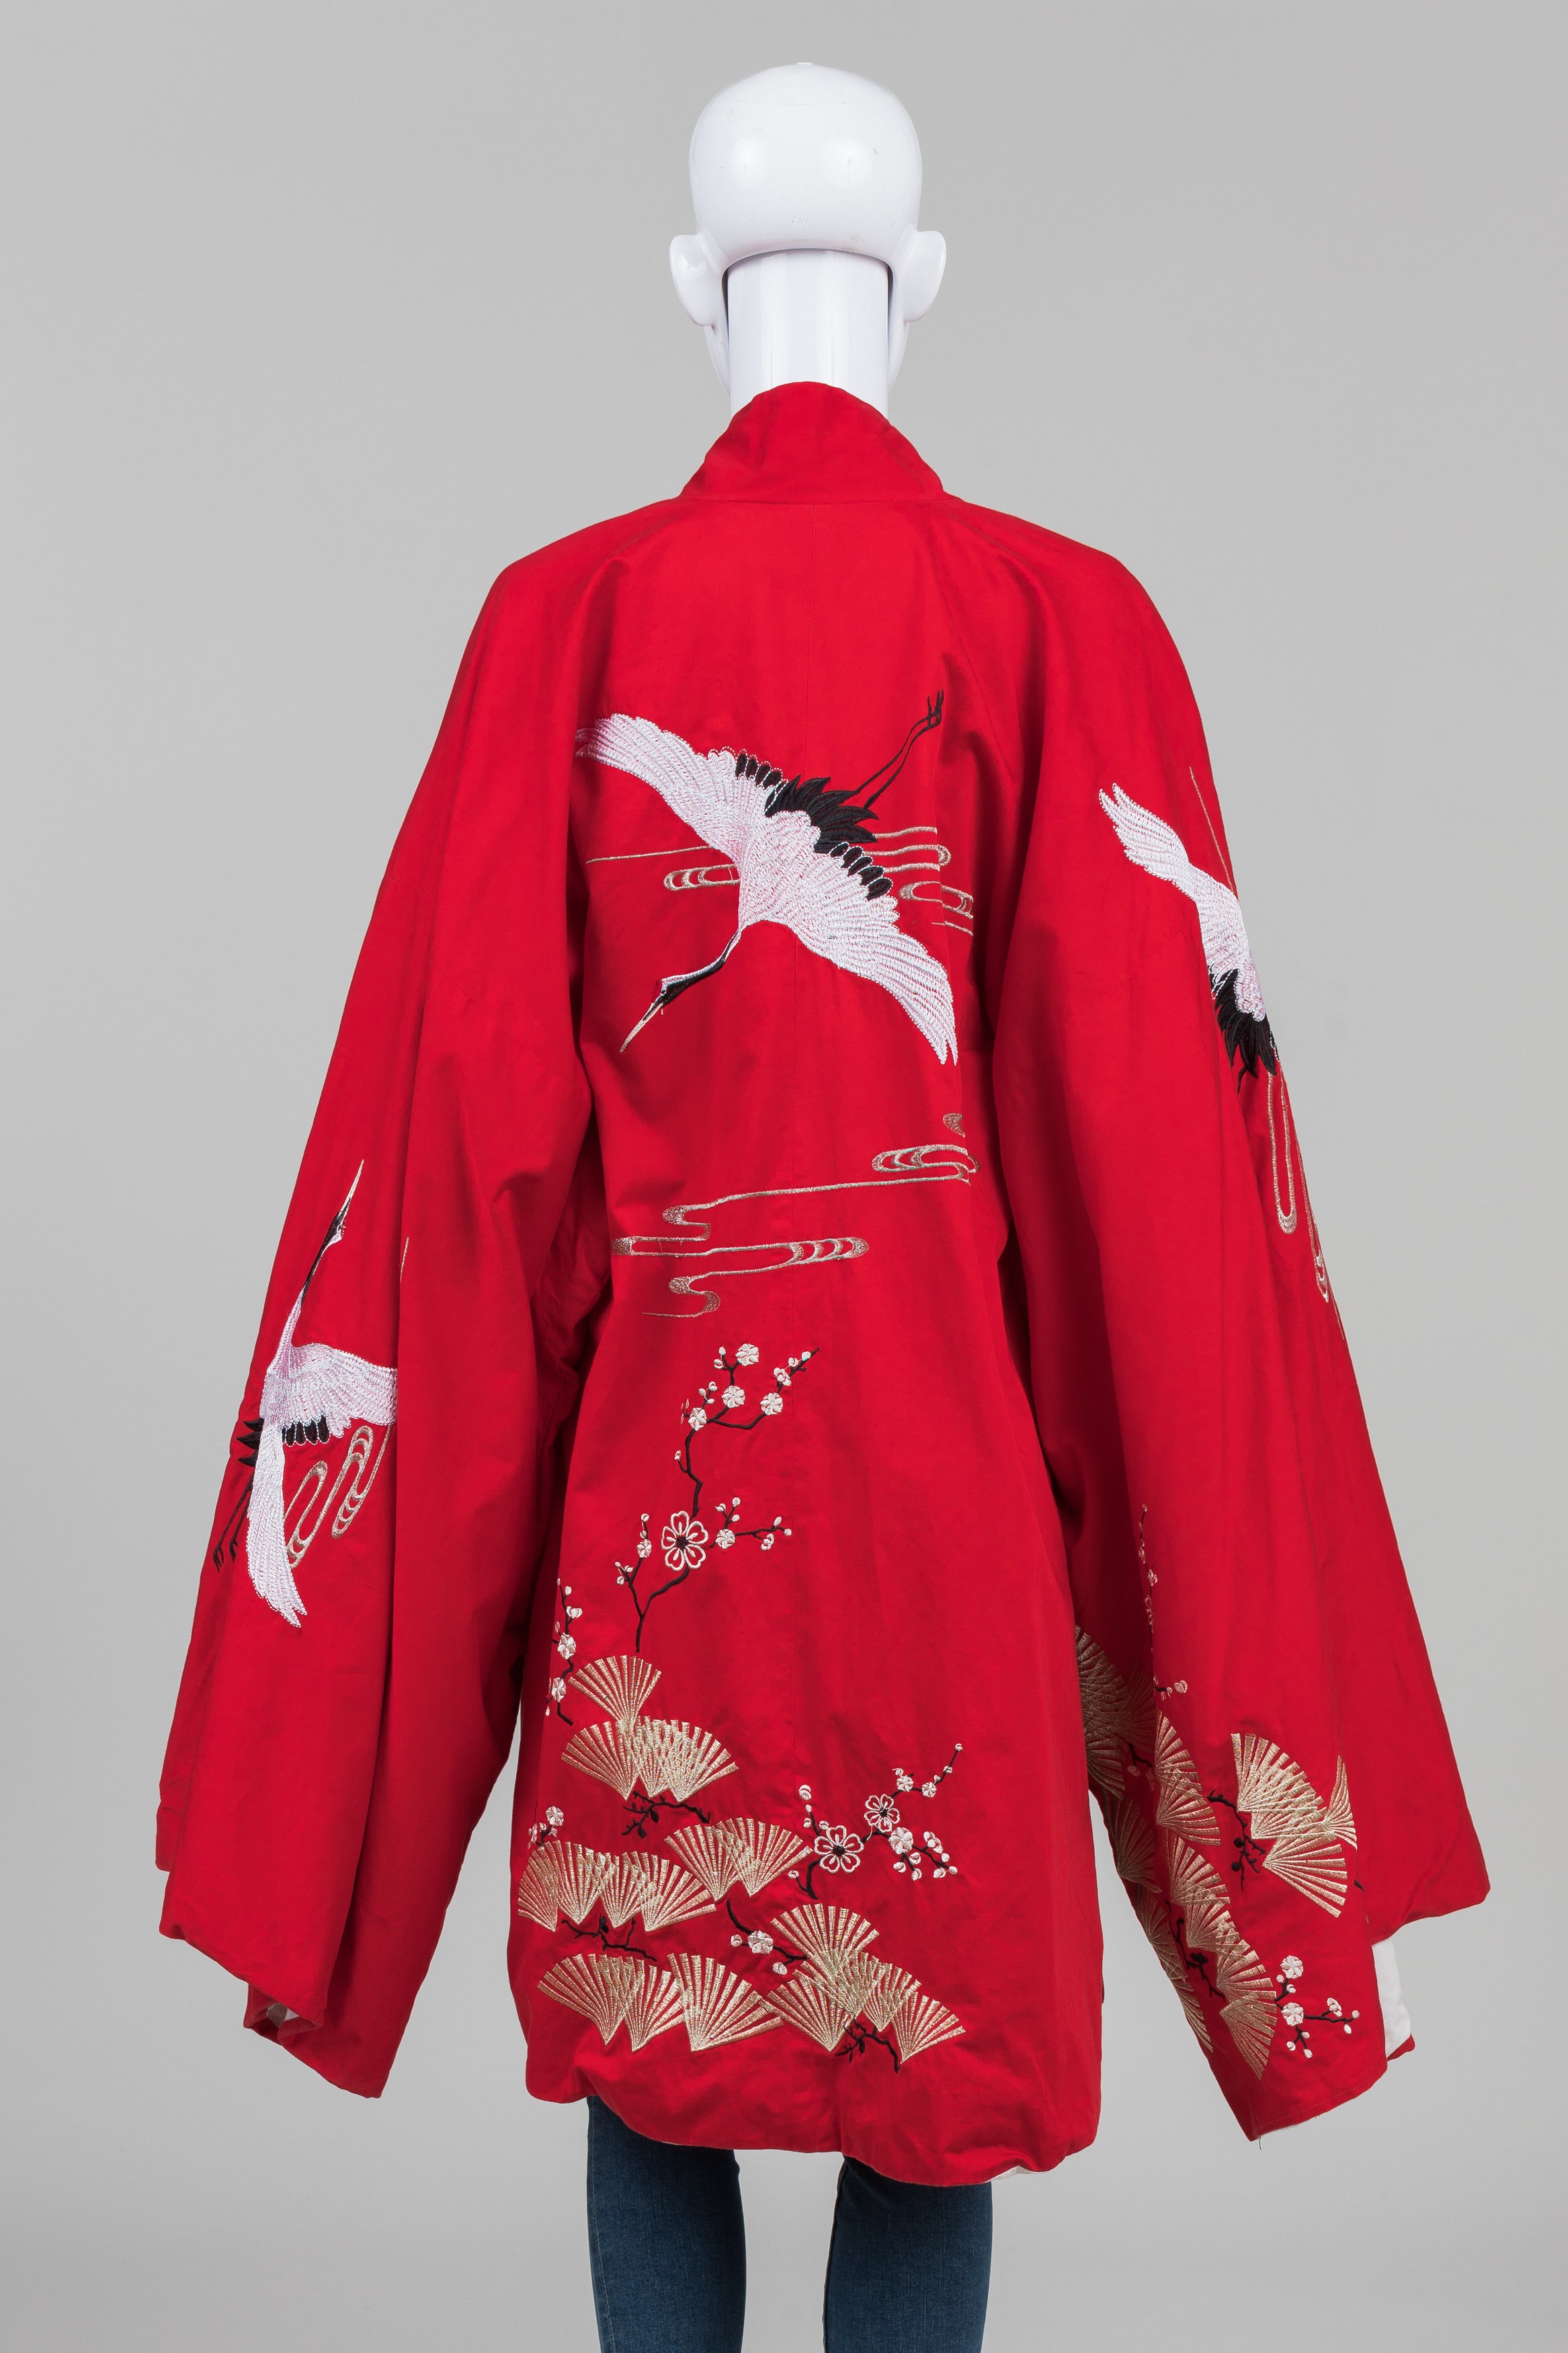 Red Embroidered Cranes Asian Robe